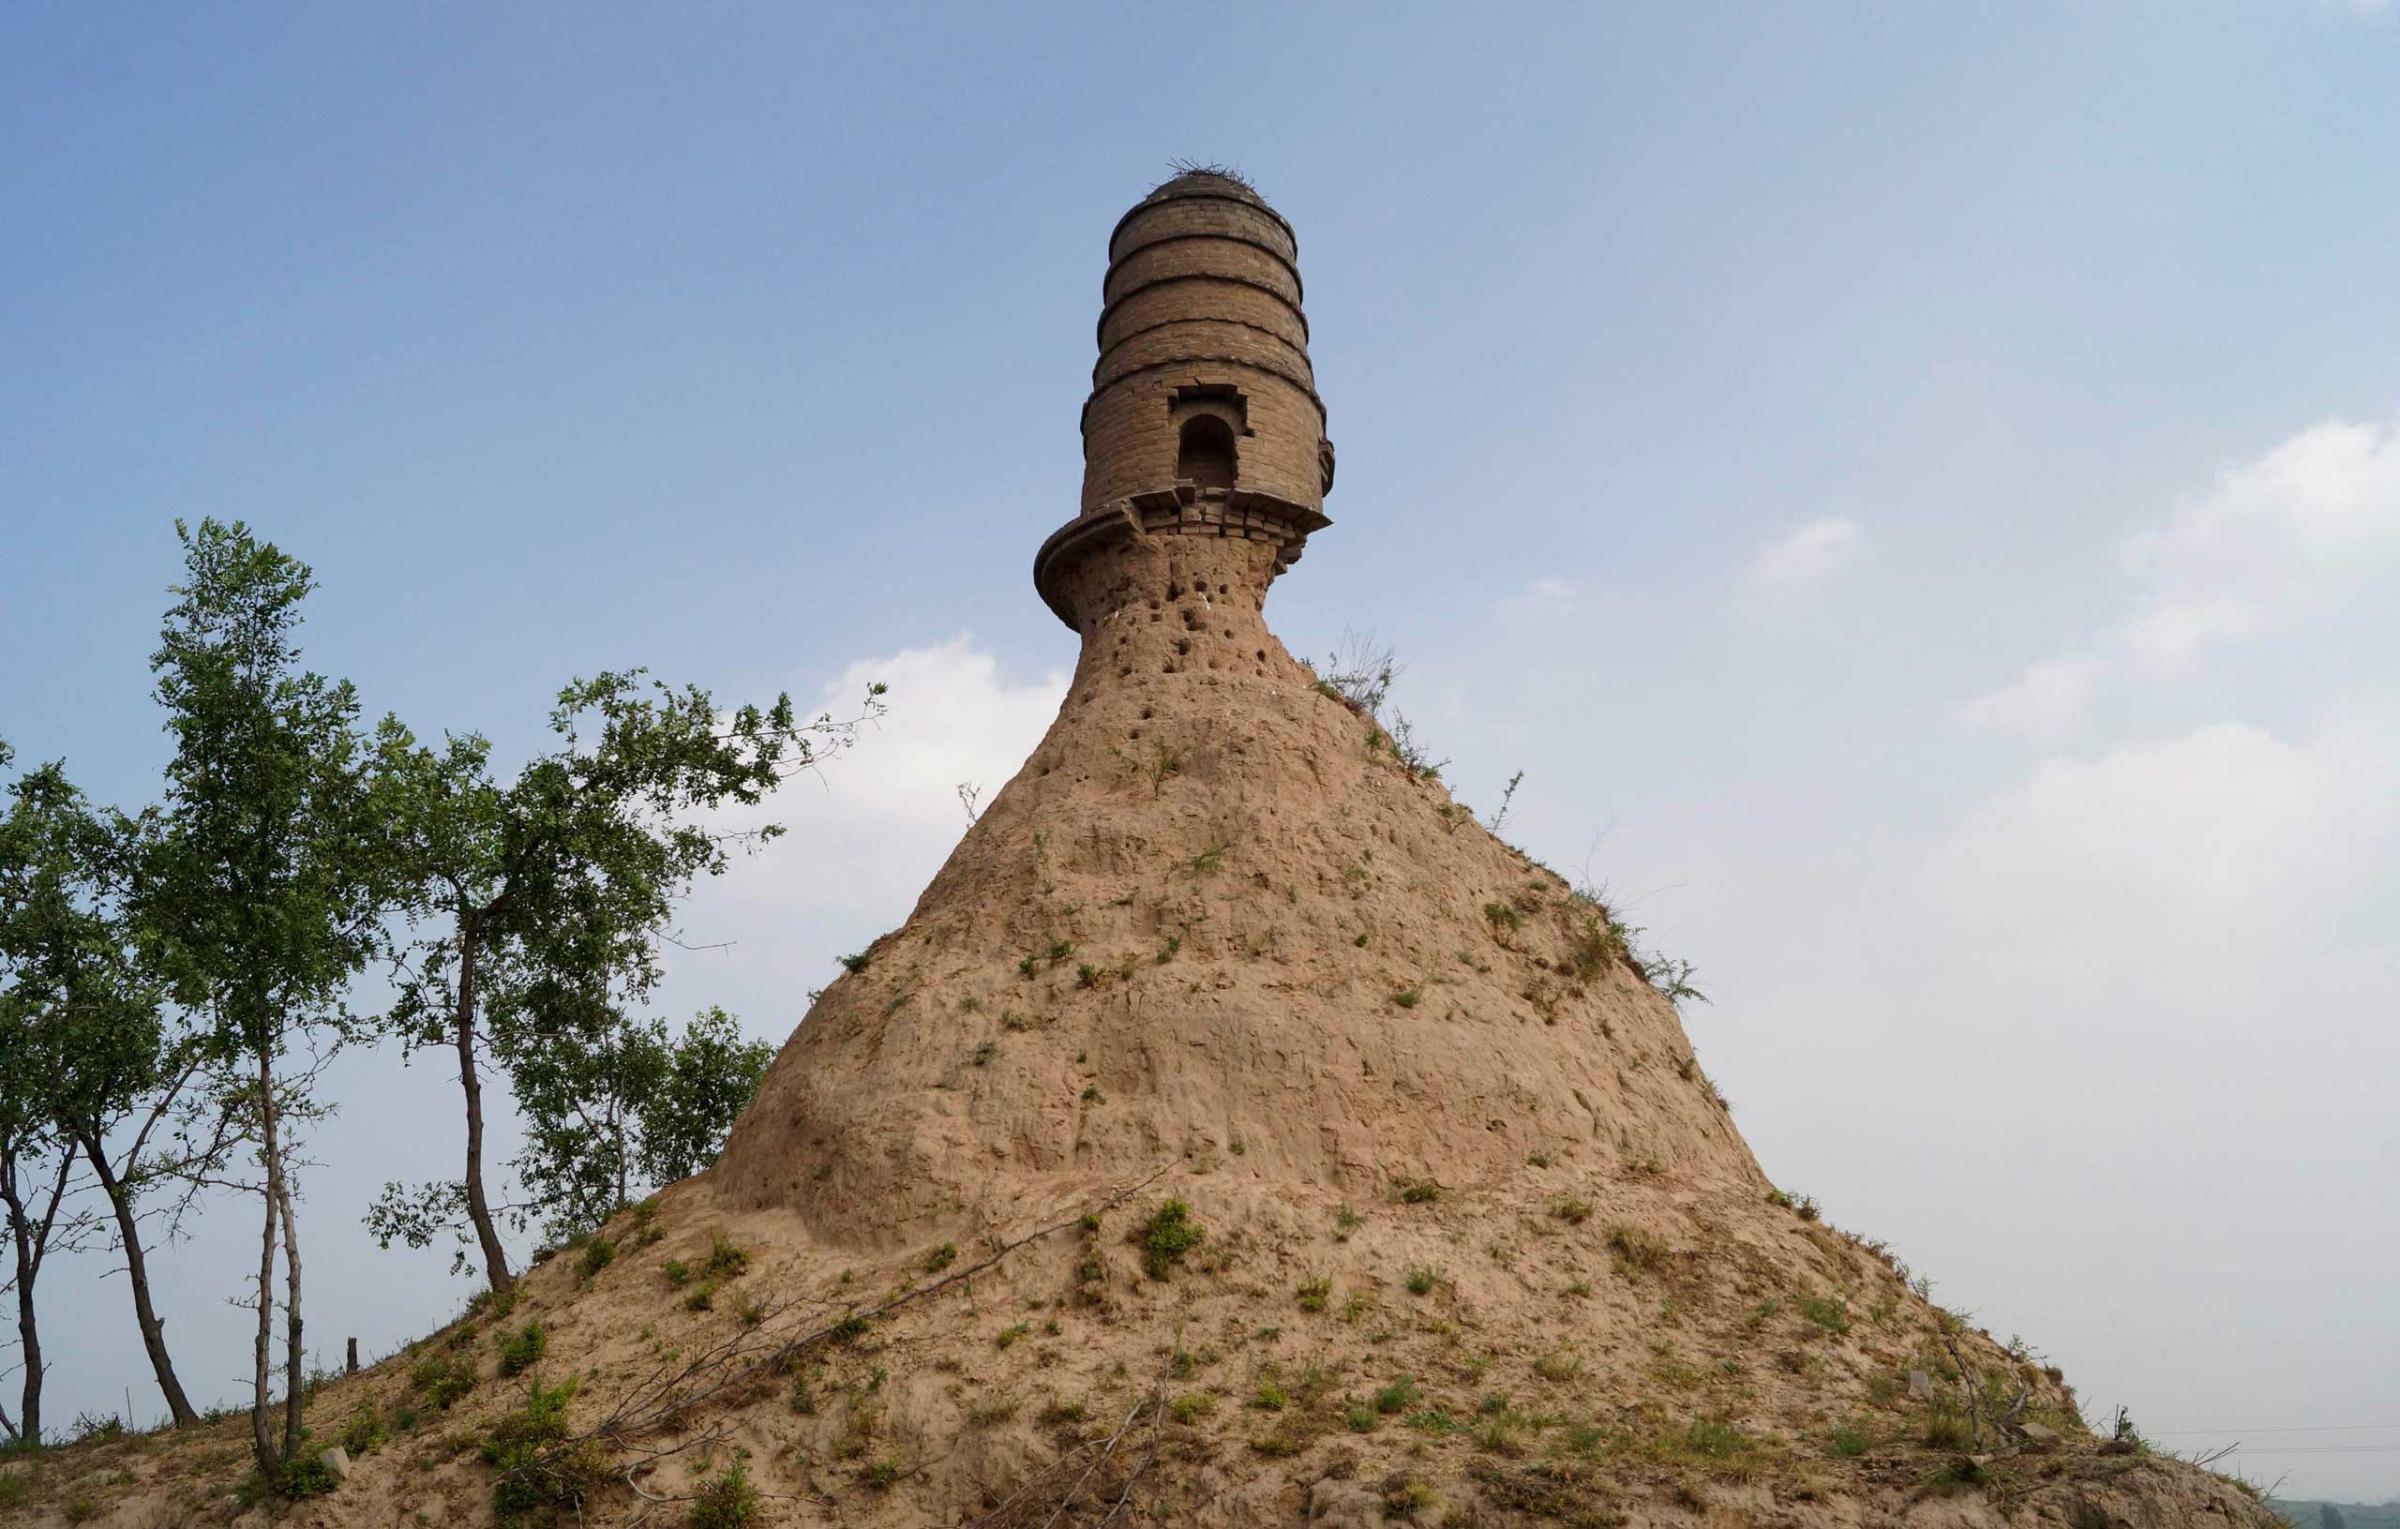 An ancient tower is seen balancing on the top of a dirt hill, with its base slightly eroded, along a grassland in Qixian county